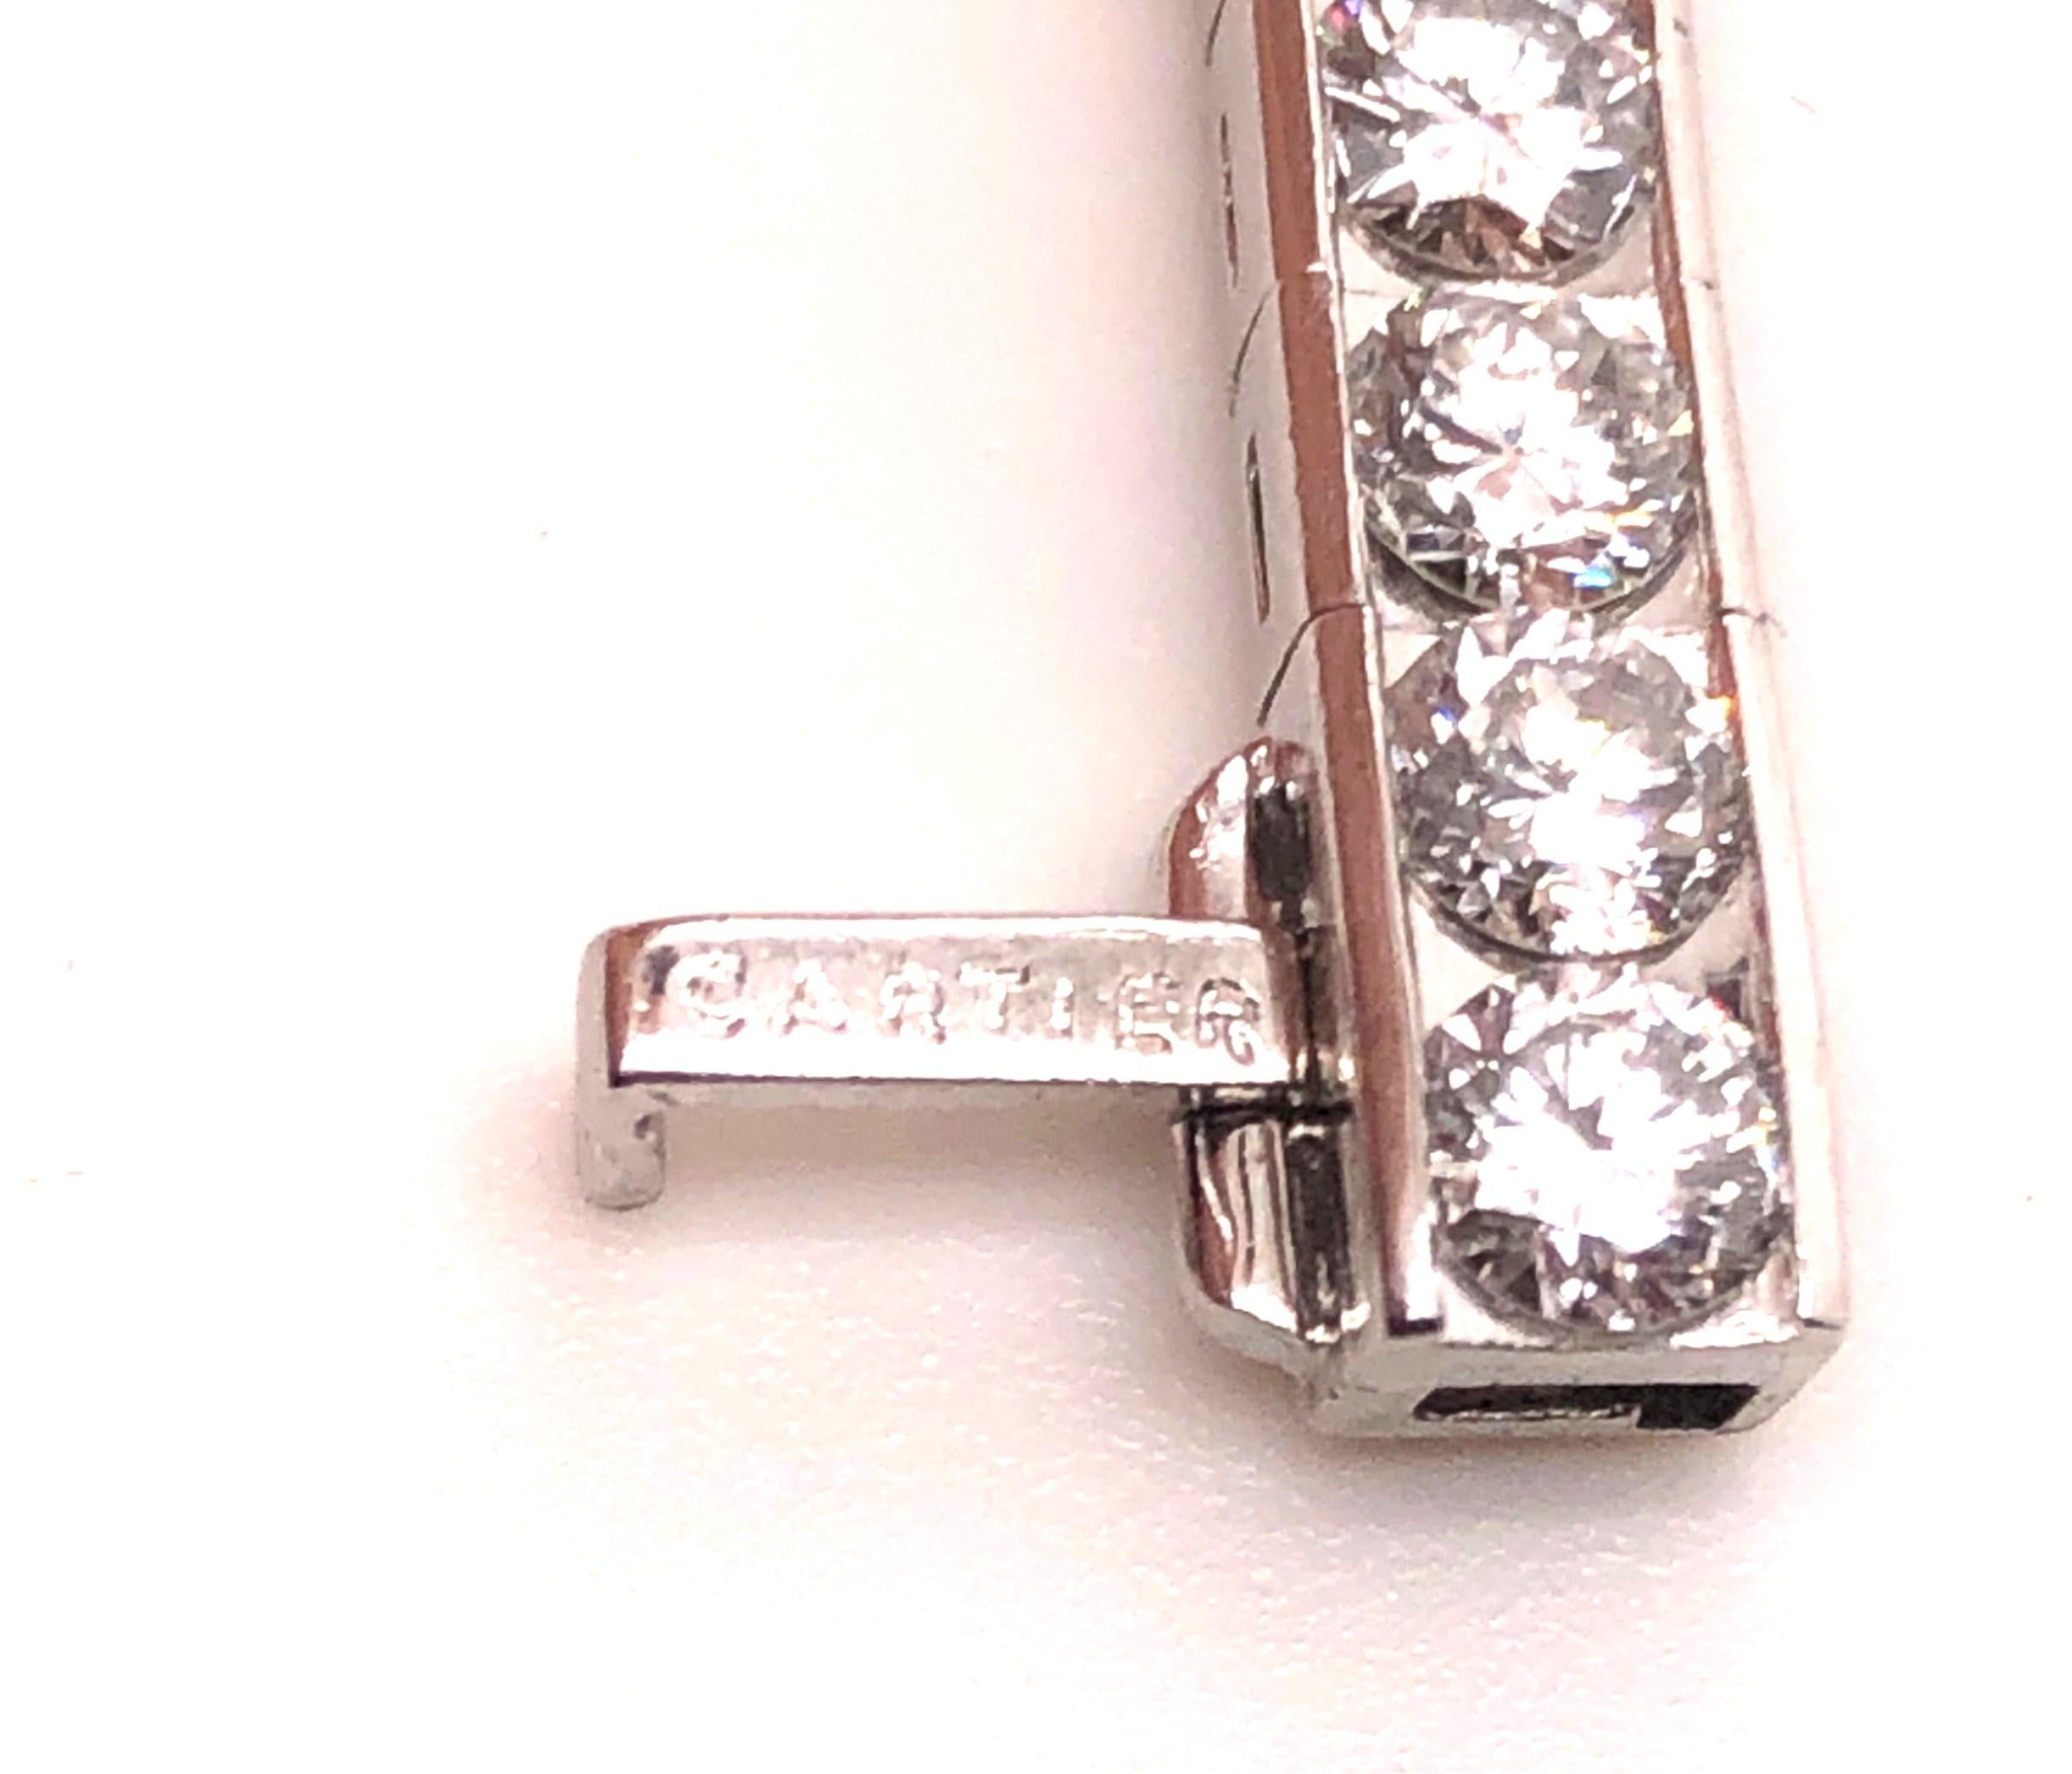 Spectacular 1950's Cartier bracelet in platinum. The line bracelet is made in all platinum and contains 9.18 total carats of round brilliant cut diamonds. Round Brilliant cut diamonds were just emerging in the 1950's so to have an entire bracelet of